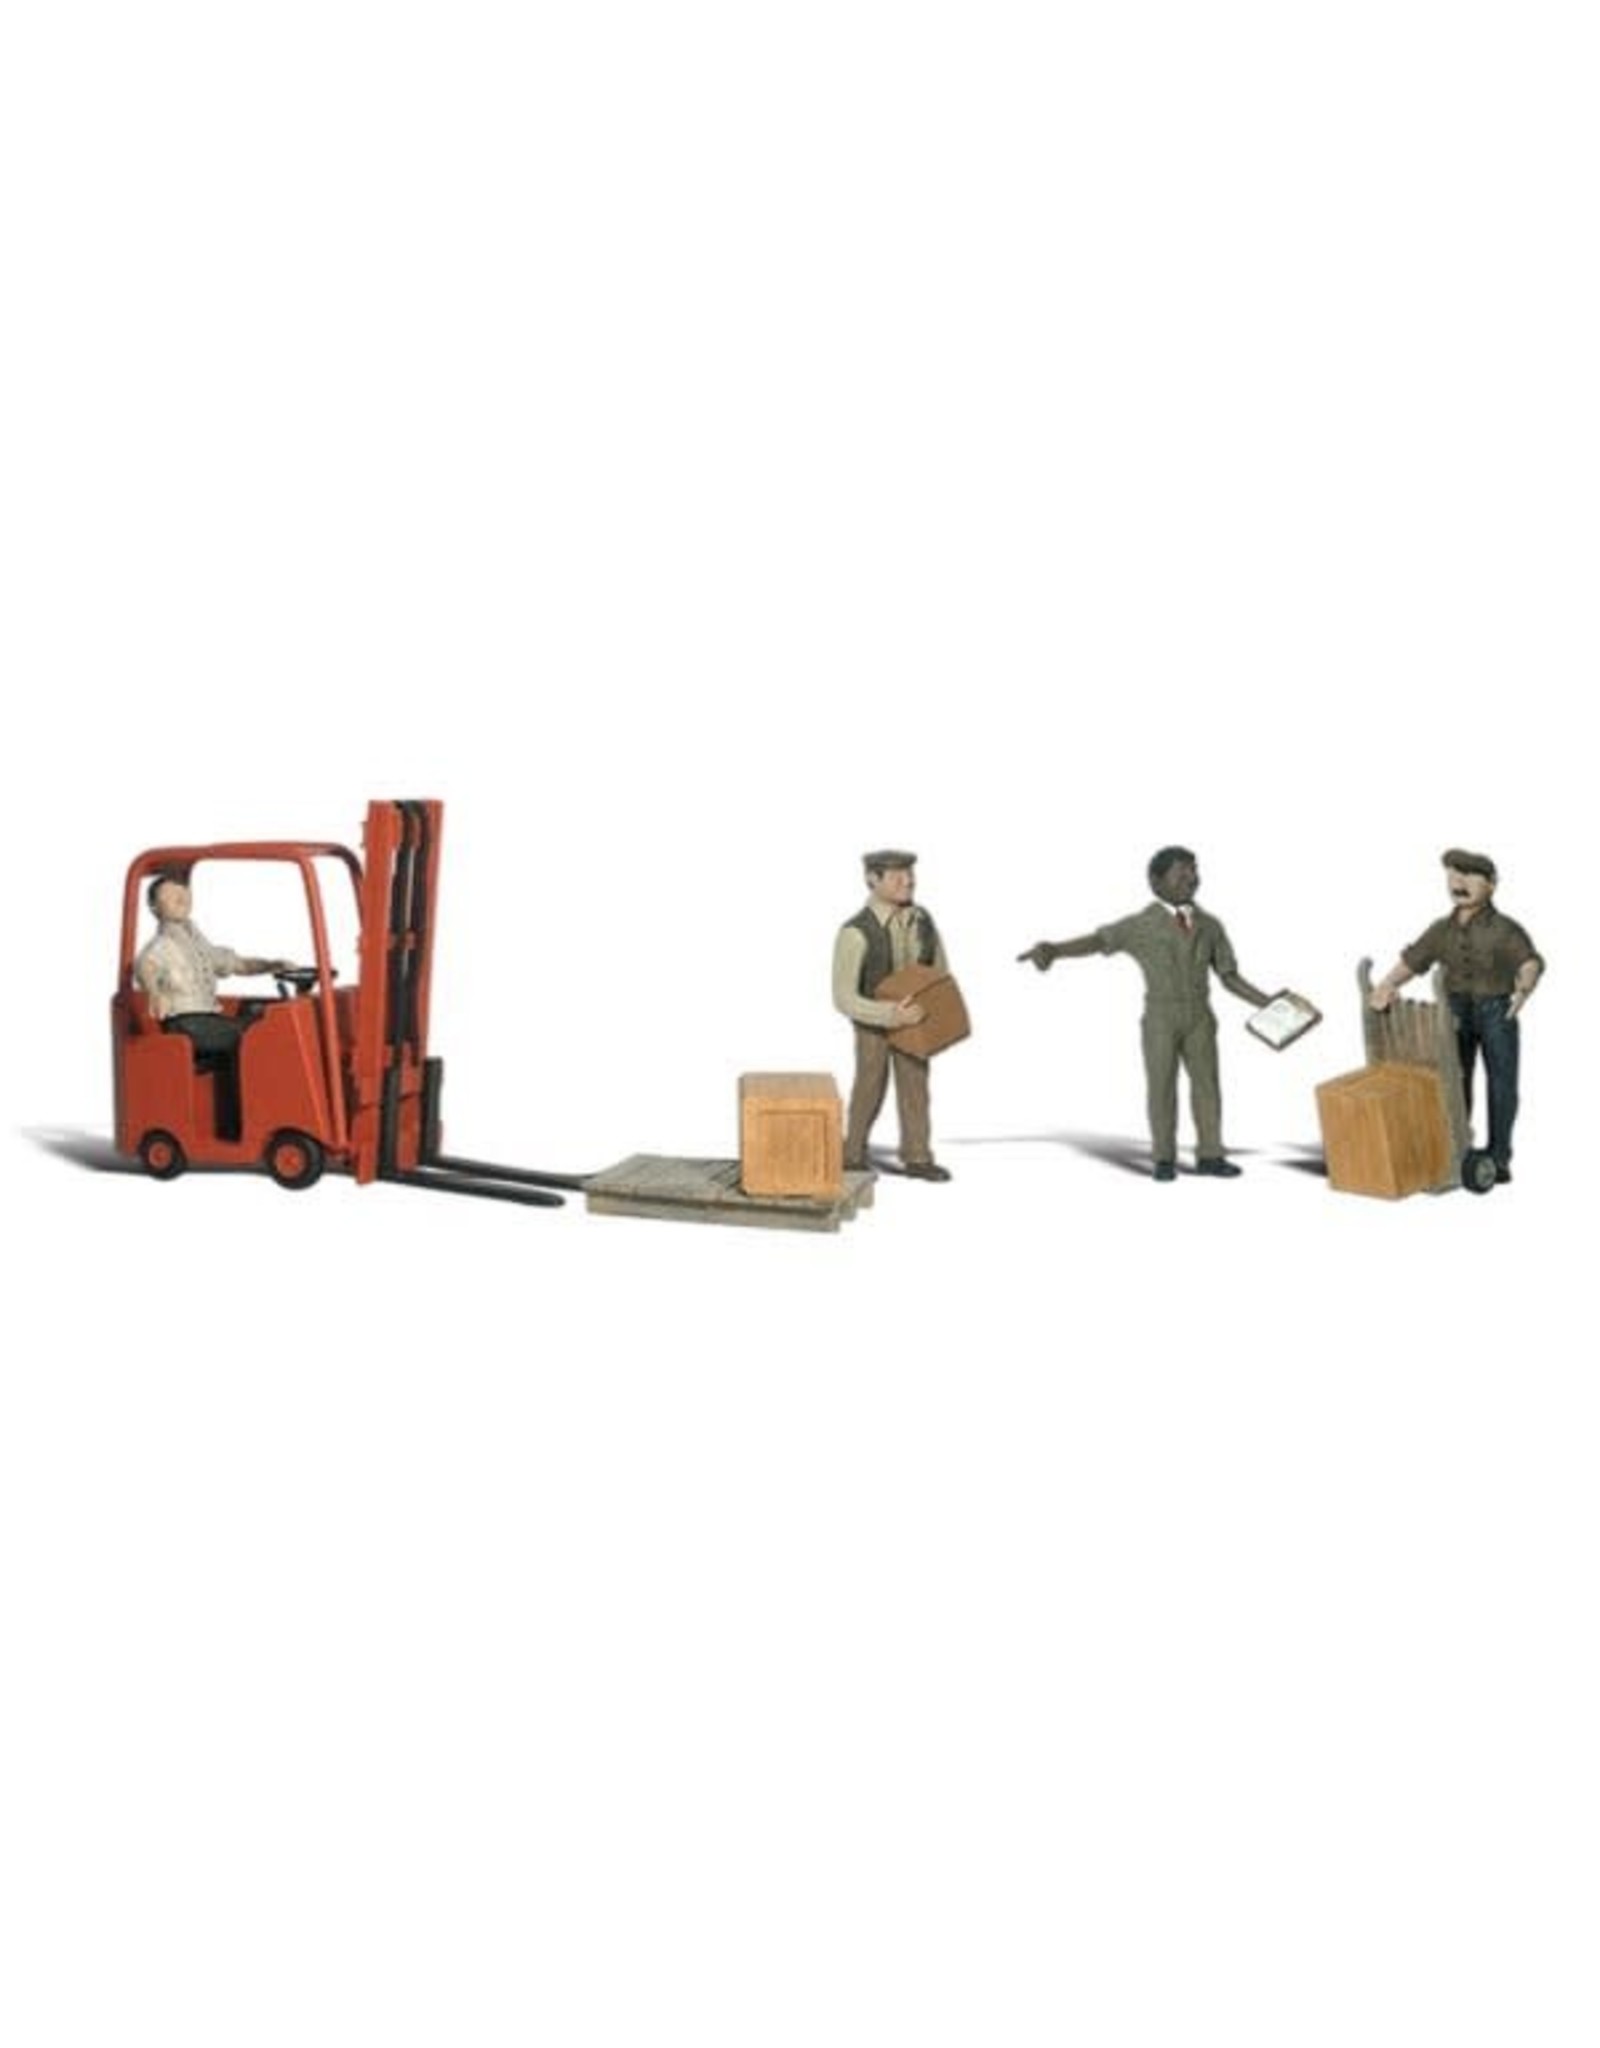 Woodland Scenics Workers with Forklift HO1911